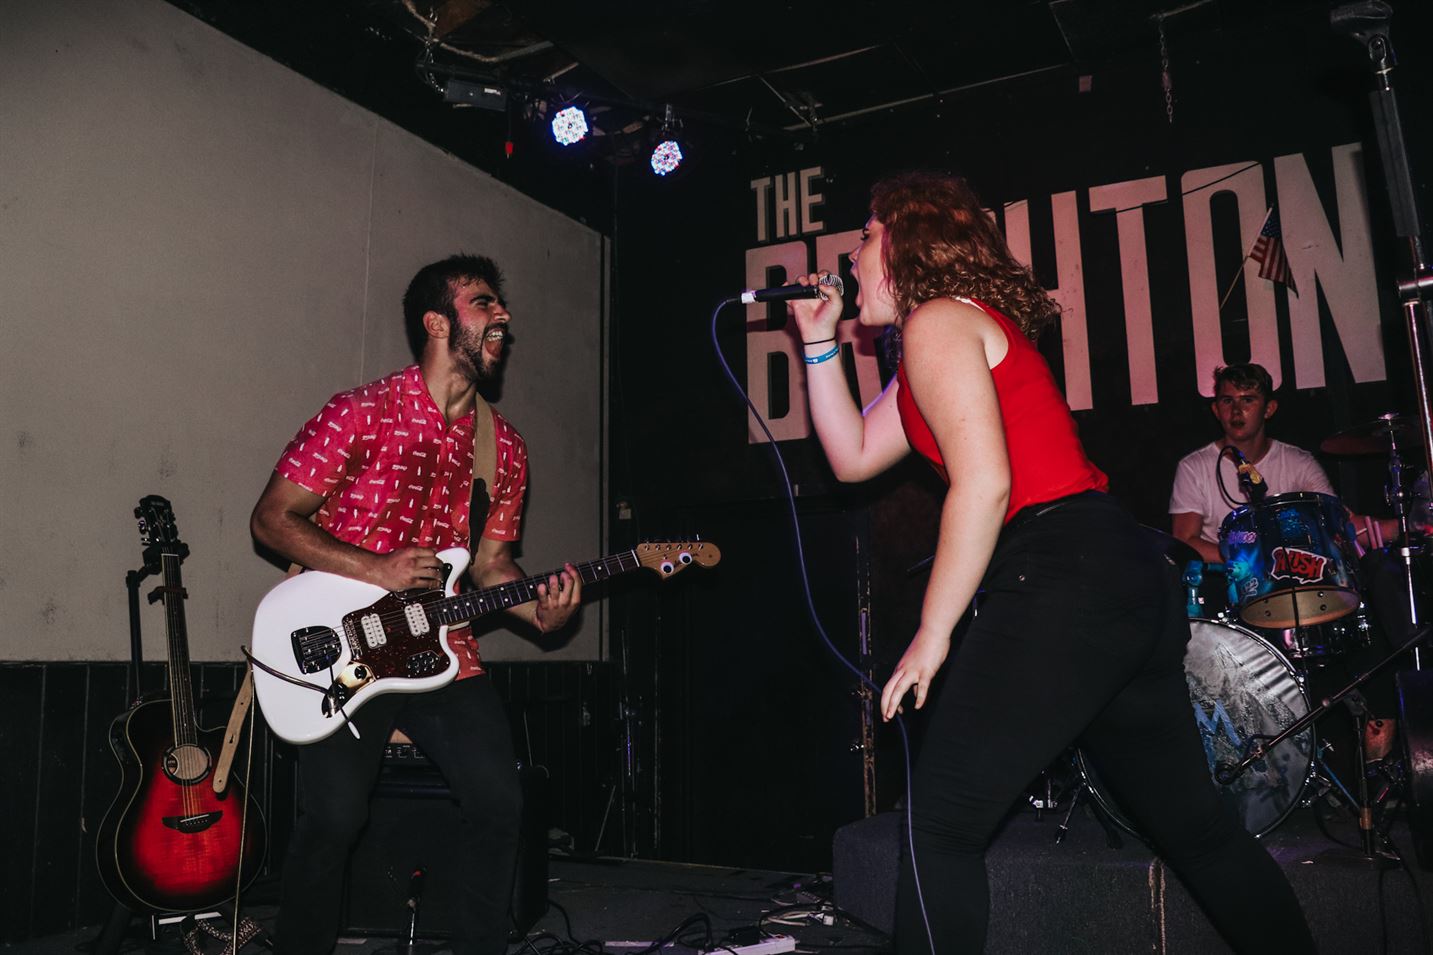 Dan Abbaticchio and Gabrielle Guida screaming and singing to each other at The Brighton Bar in July 2018. Photo Courtesy of Chloe Brenna